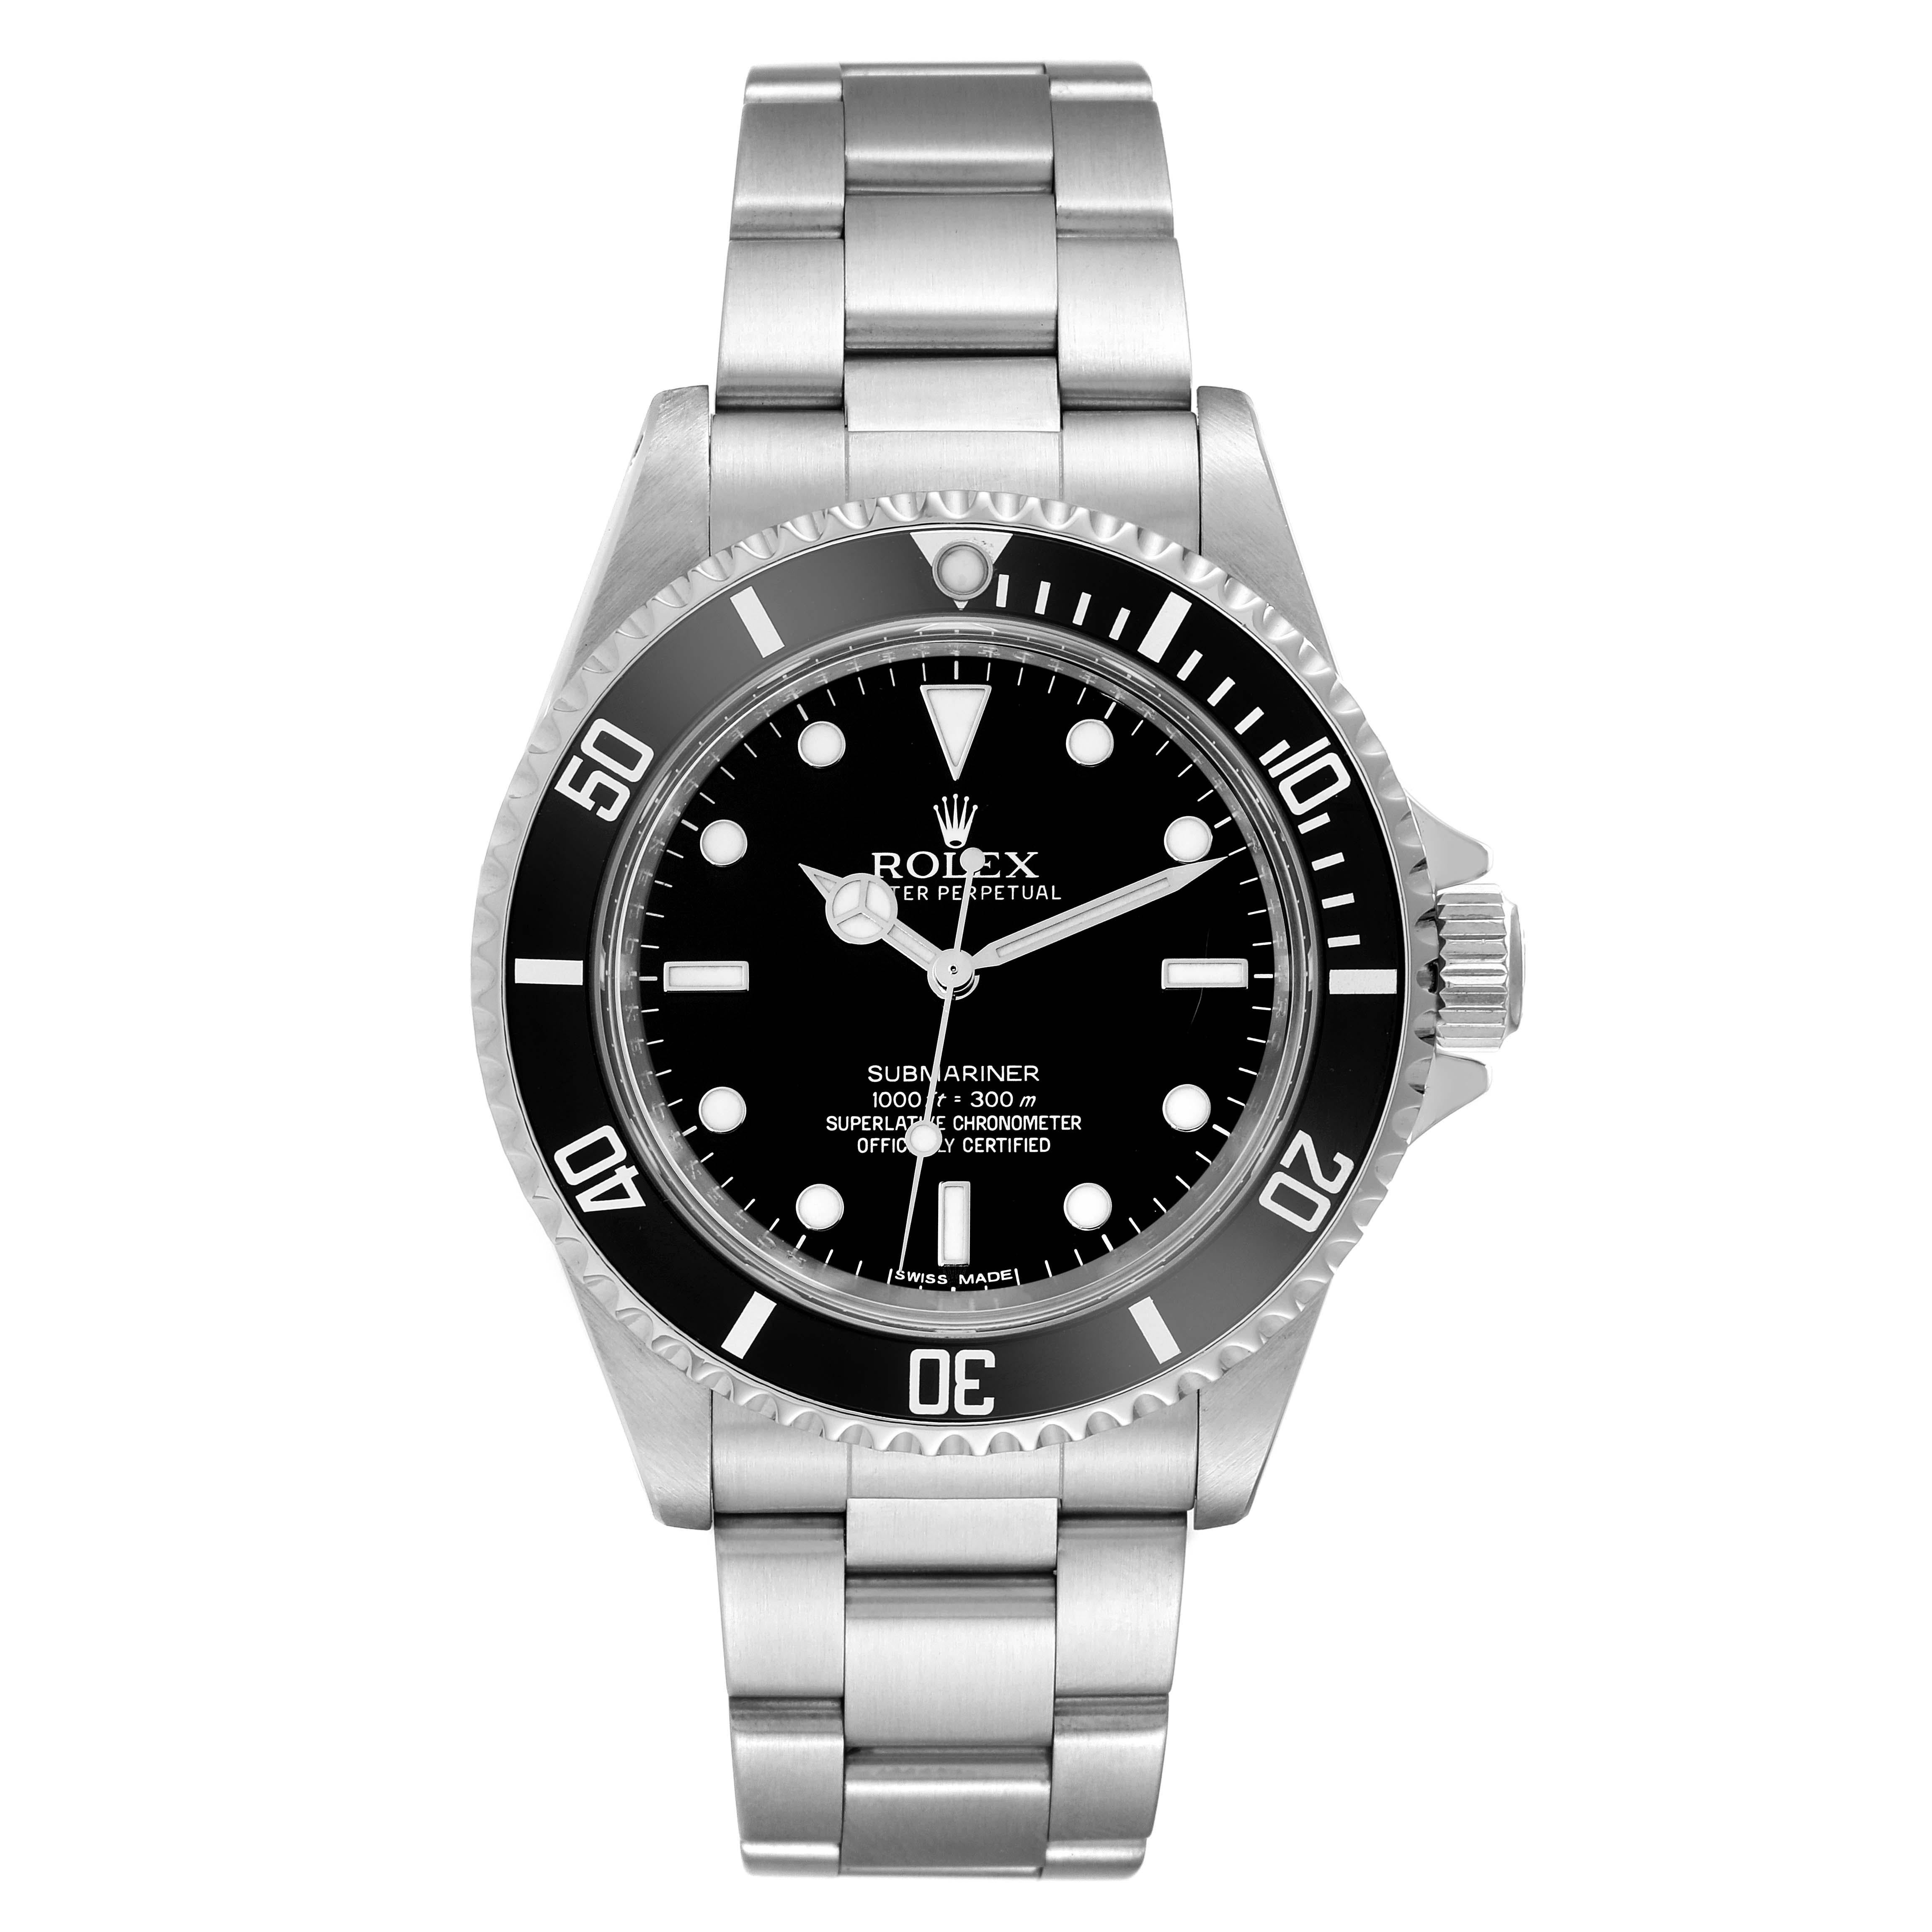 Rolex Submariner No Date 40mm 4 Liner Steel Mens Watch 14060 Box Card. Officially certified chronometer automatic self-winding movement. Stainless steel case 40.0 mm in diameter. Rolex logo on the crown. Special time-lapse unidirectional rotating